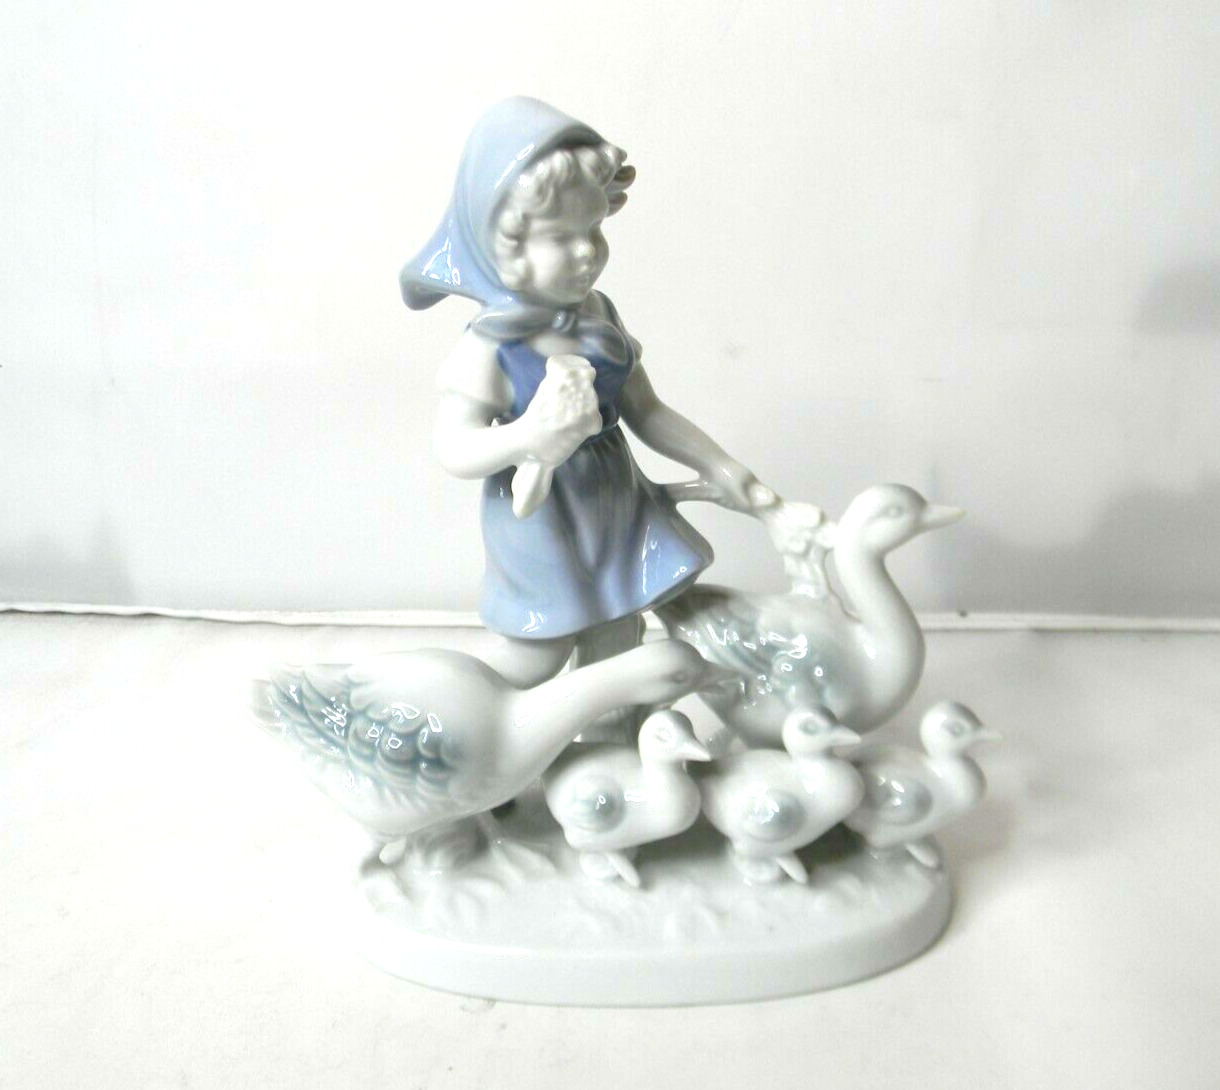 GEROLD Porcelain Farm Girl and Geese flock Figurine Blue White W. Germany 6138/B